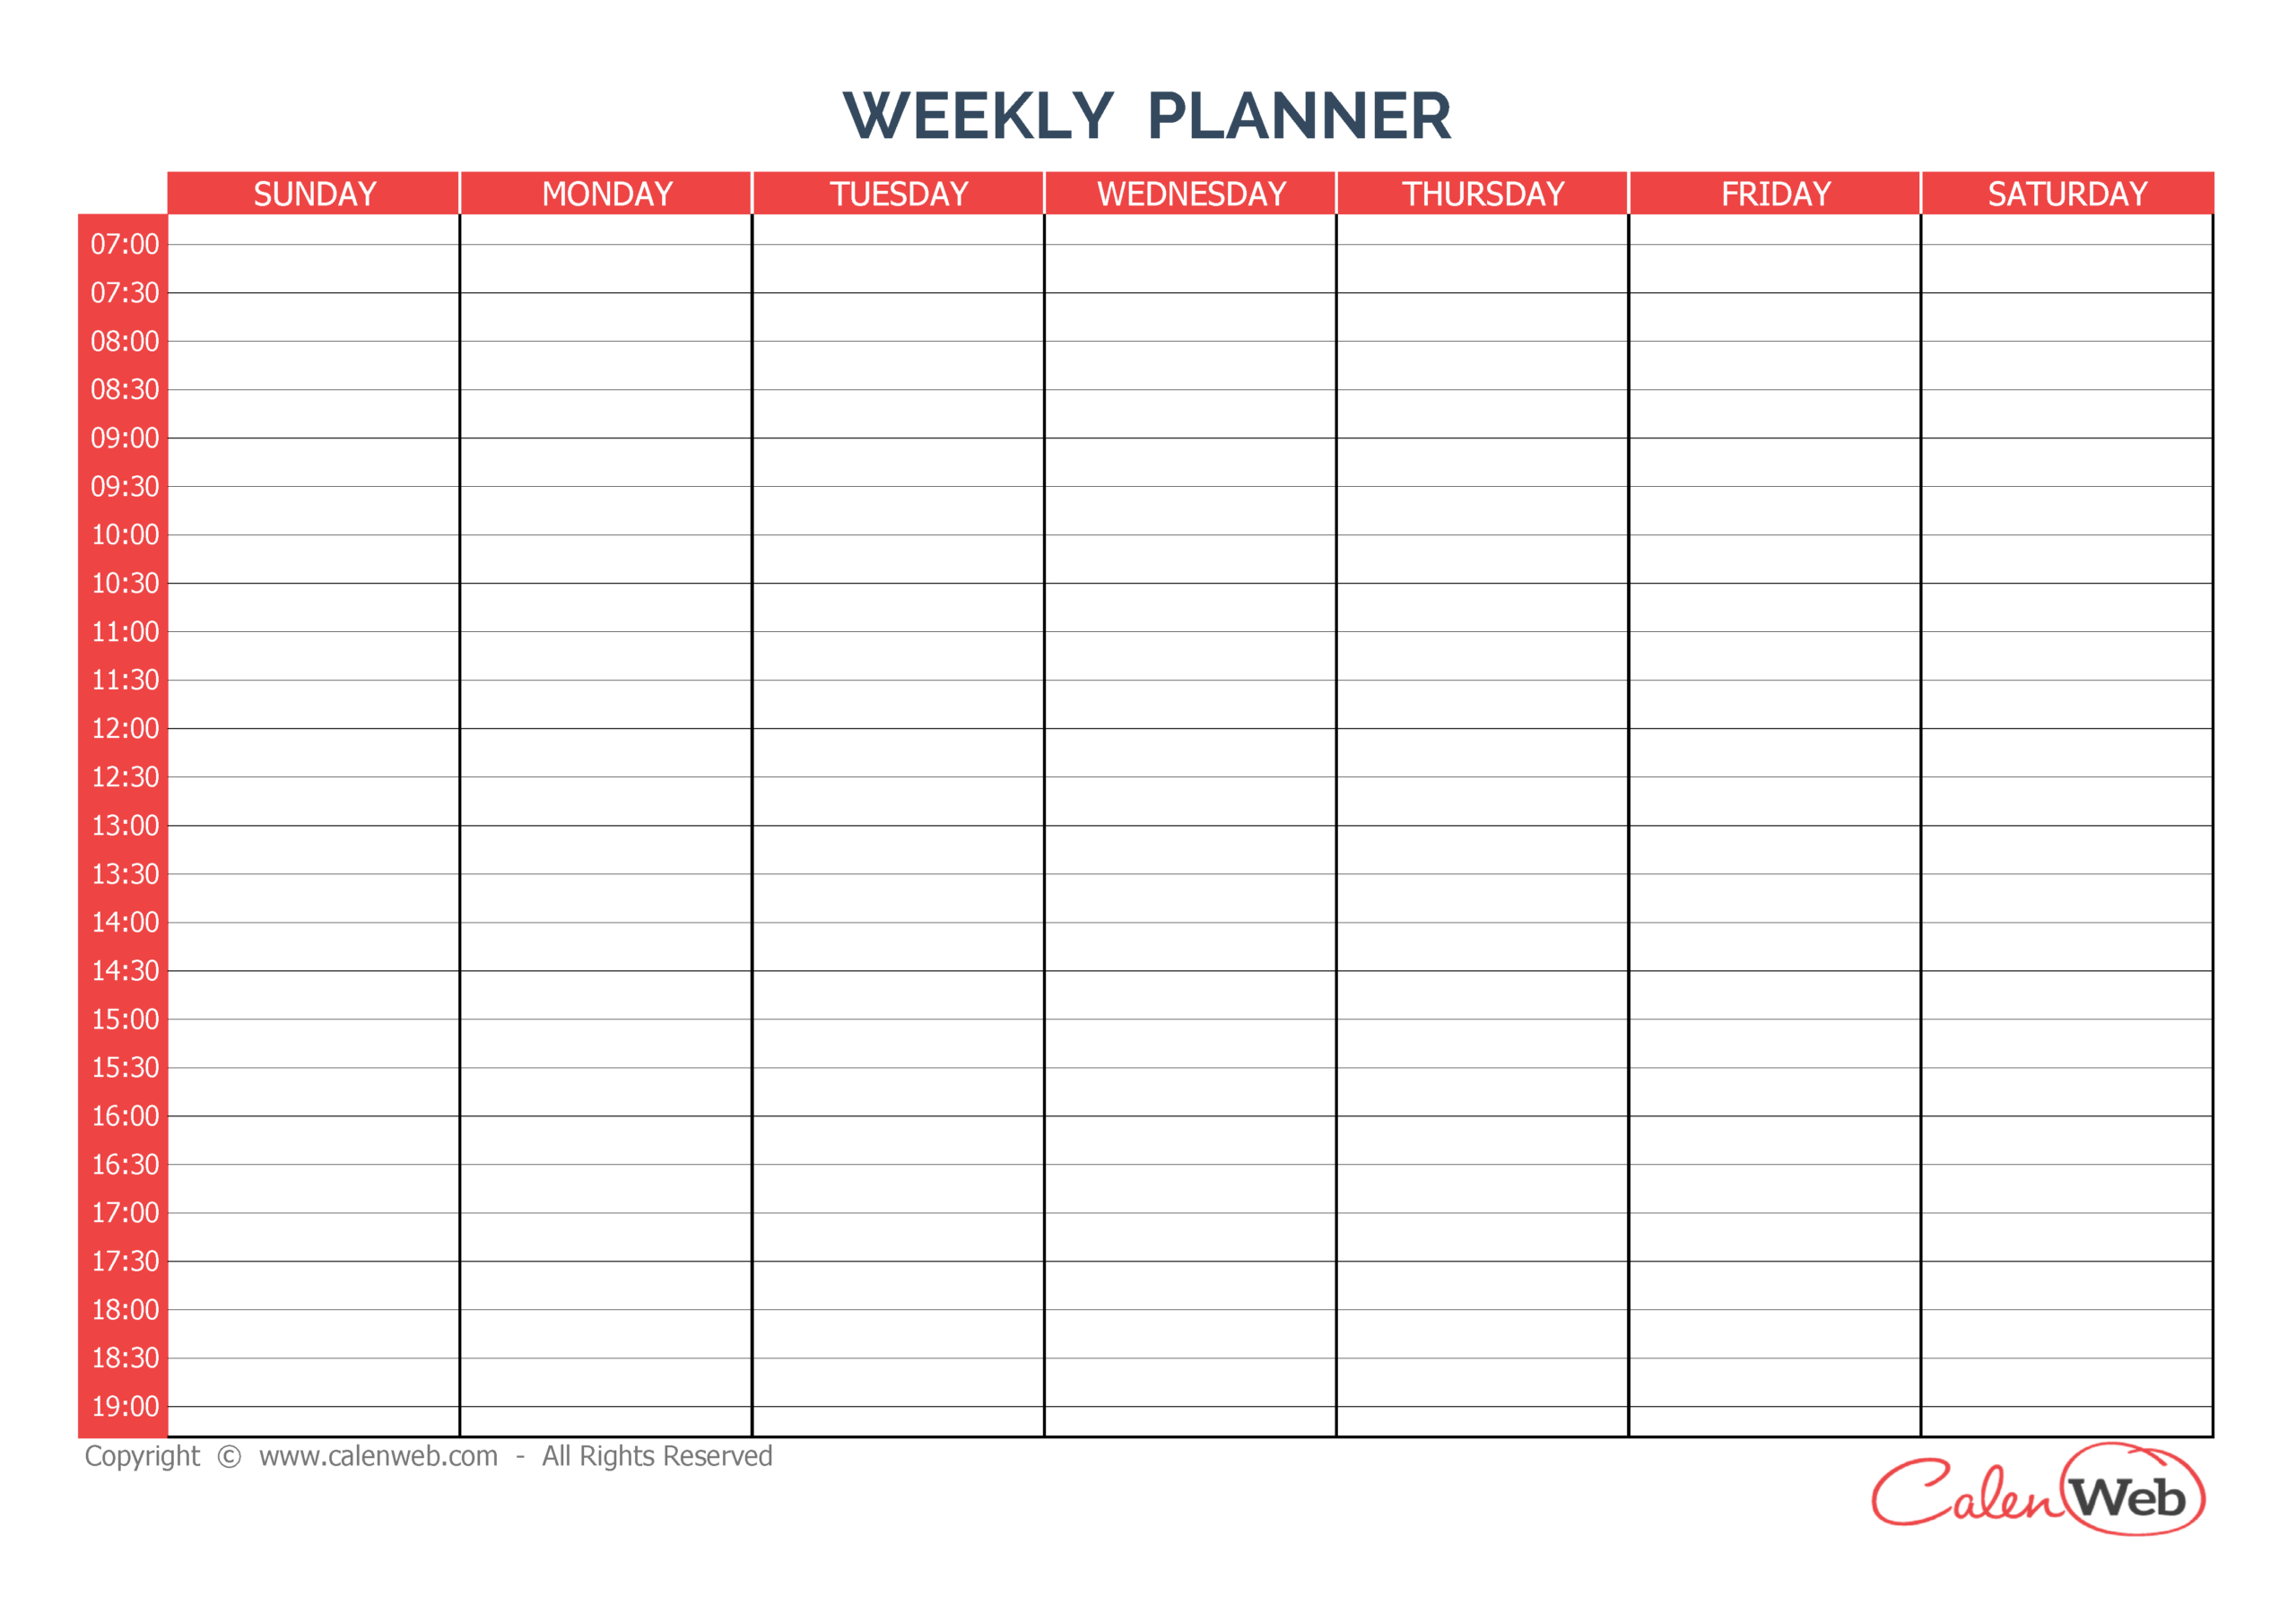 Weekly Planner 7 Days - First Day: Sunday A Week Of 7 Days